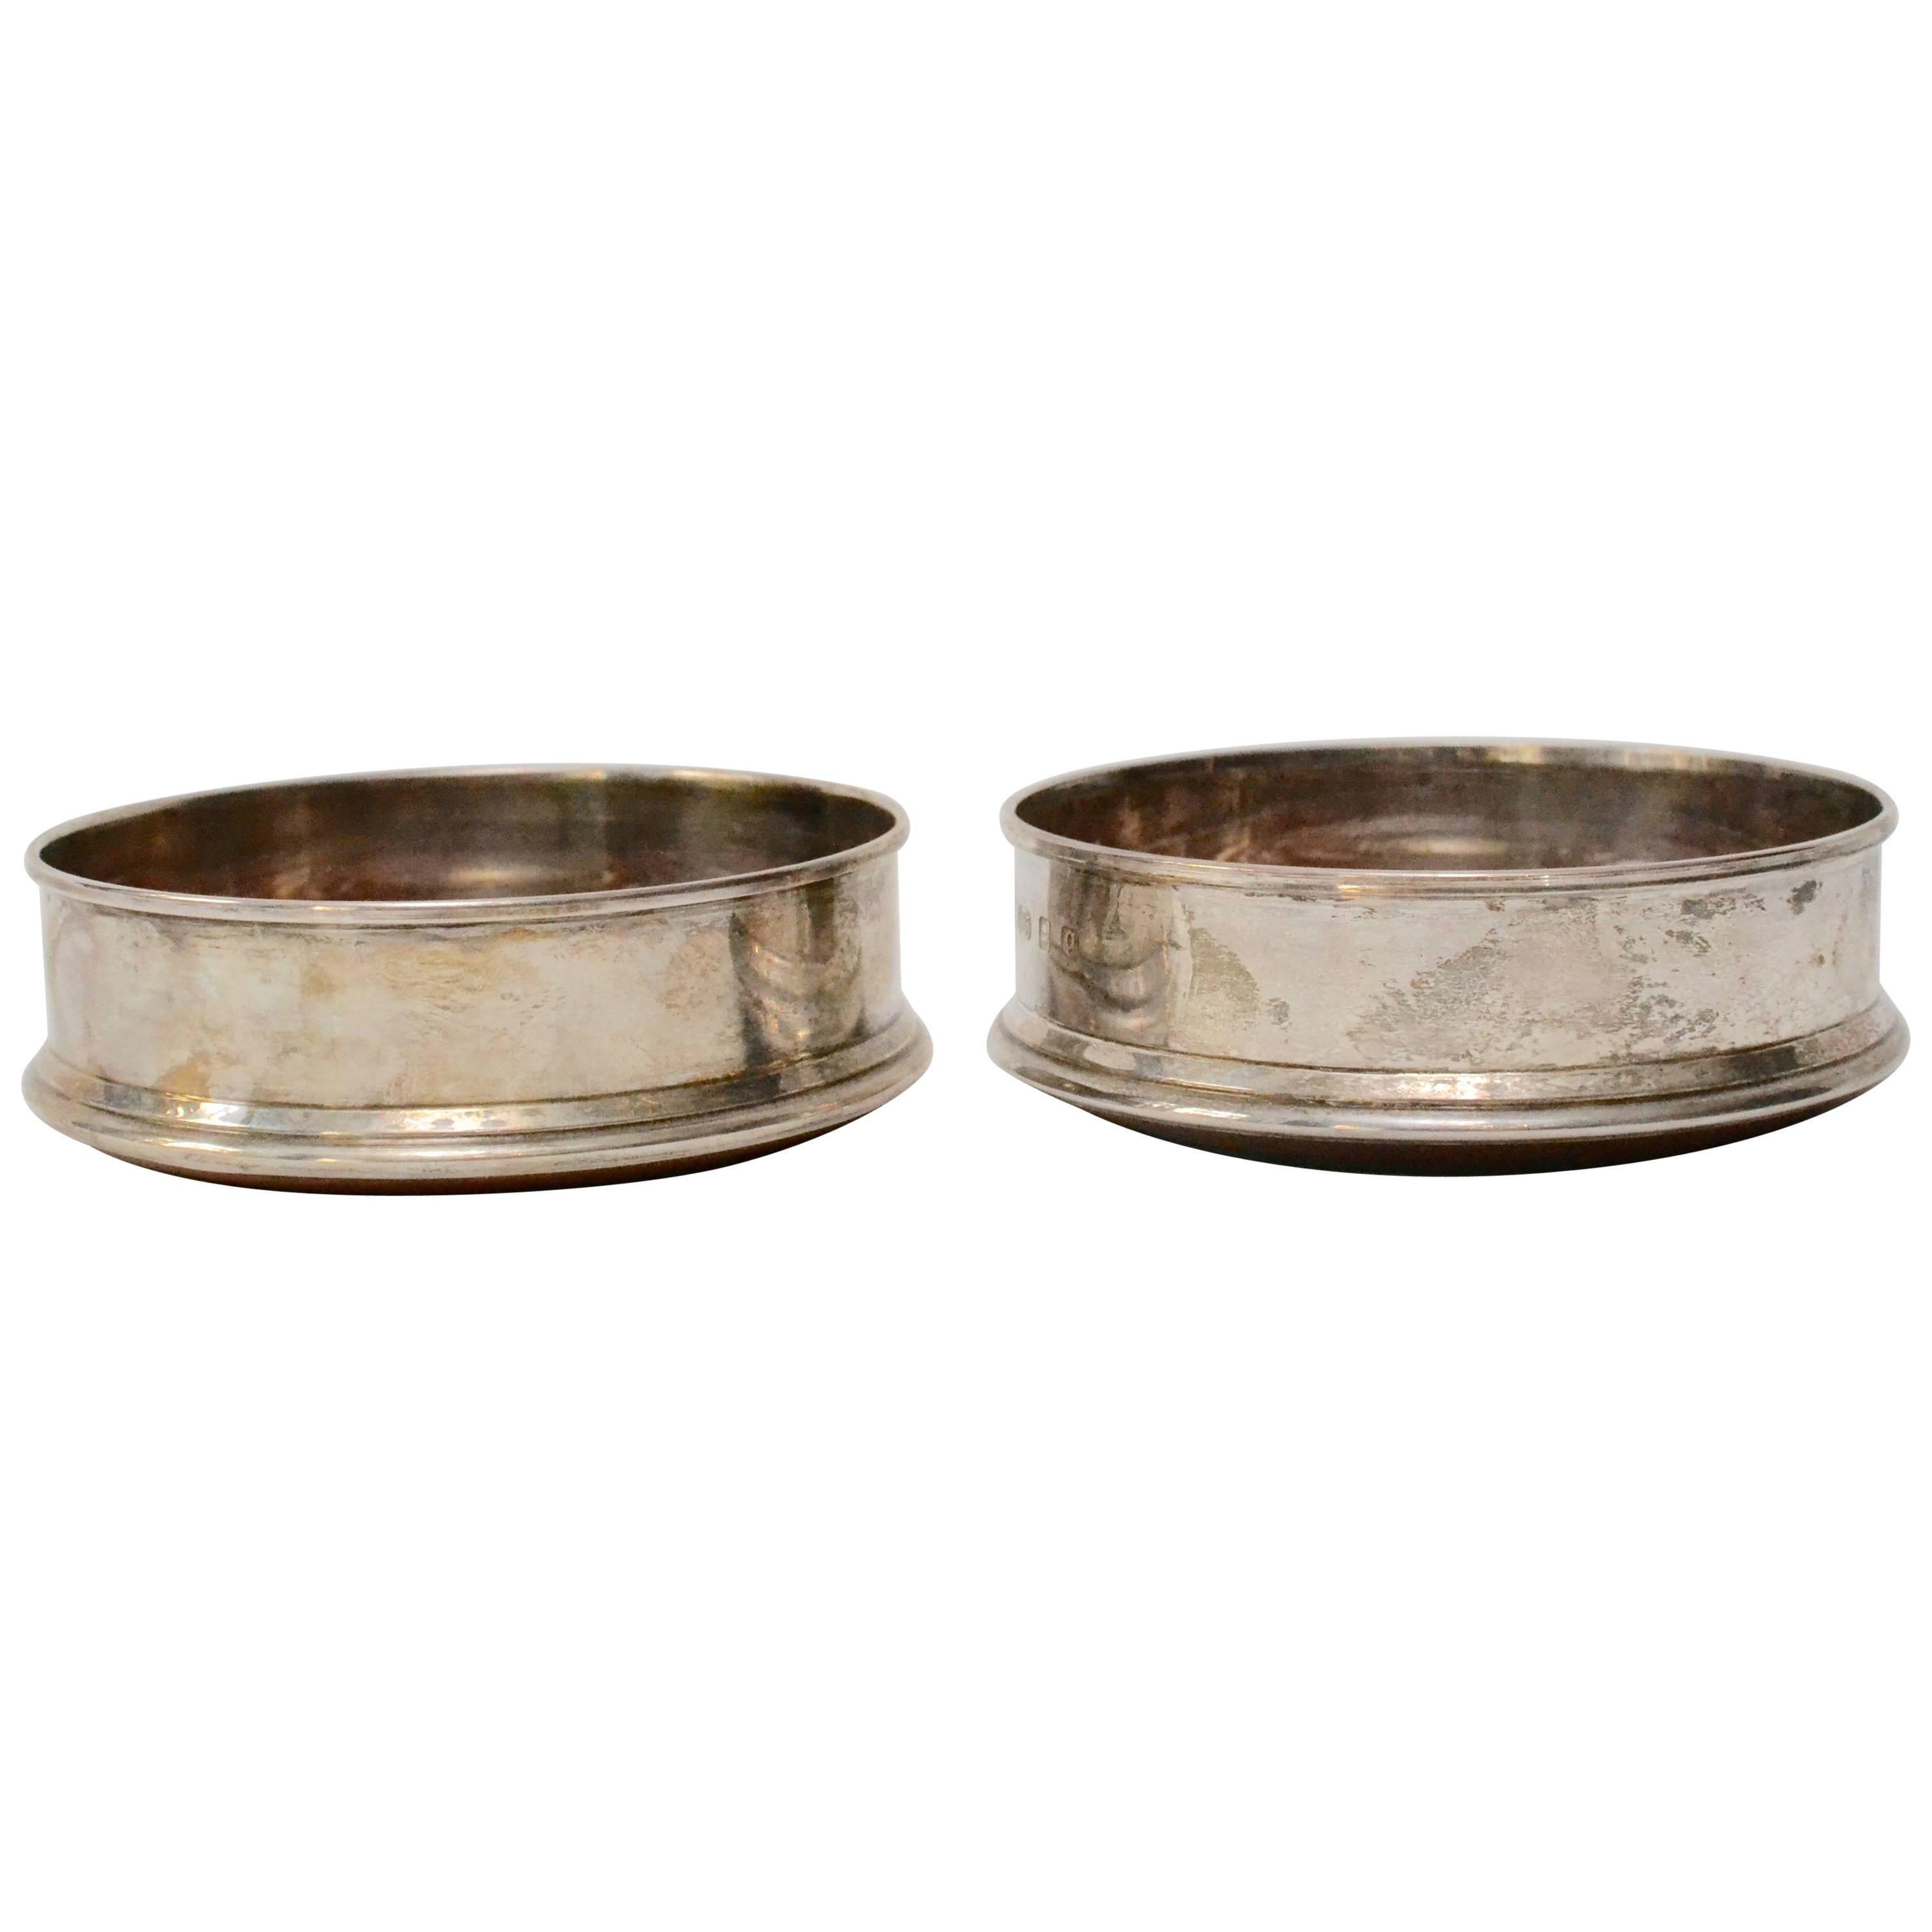 Pair of Silver Coasters, 19th Century